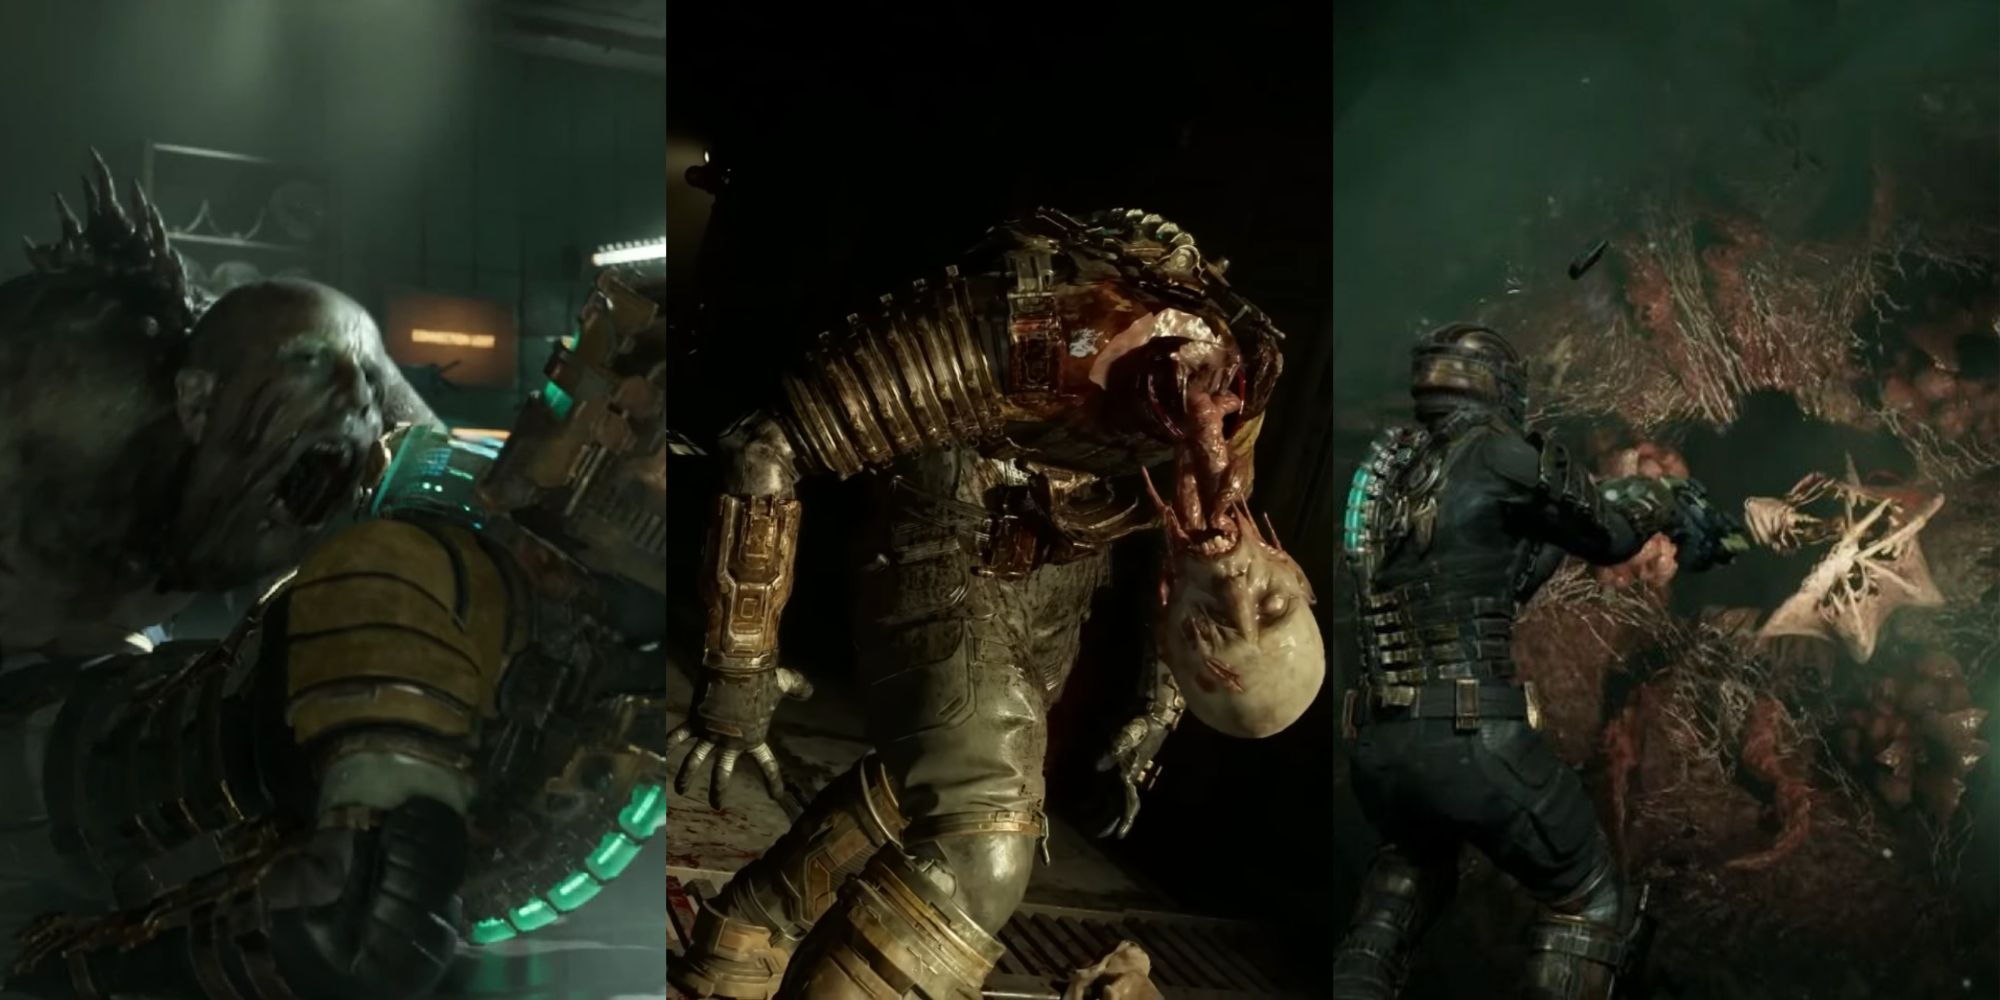 In the lastest blog of our Inside Dead Space series, we go back to the  beginning and explore why our team decided to remake this horror…